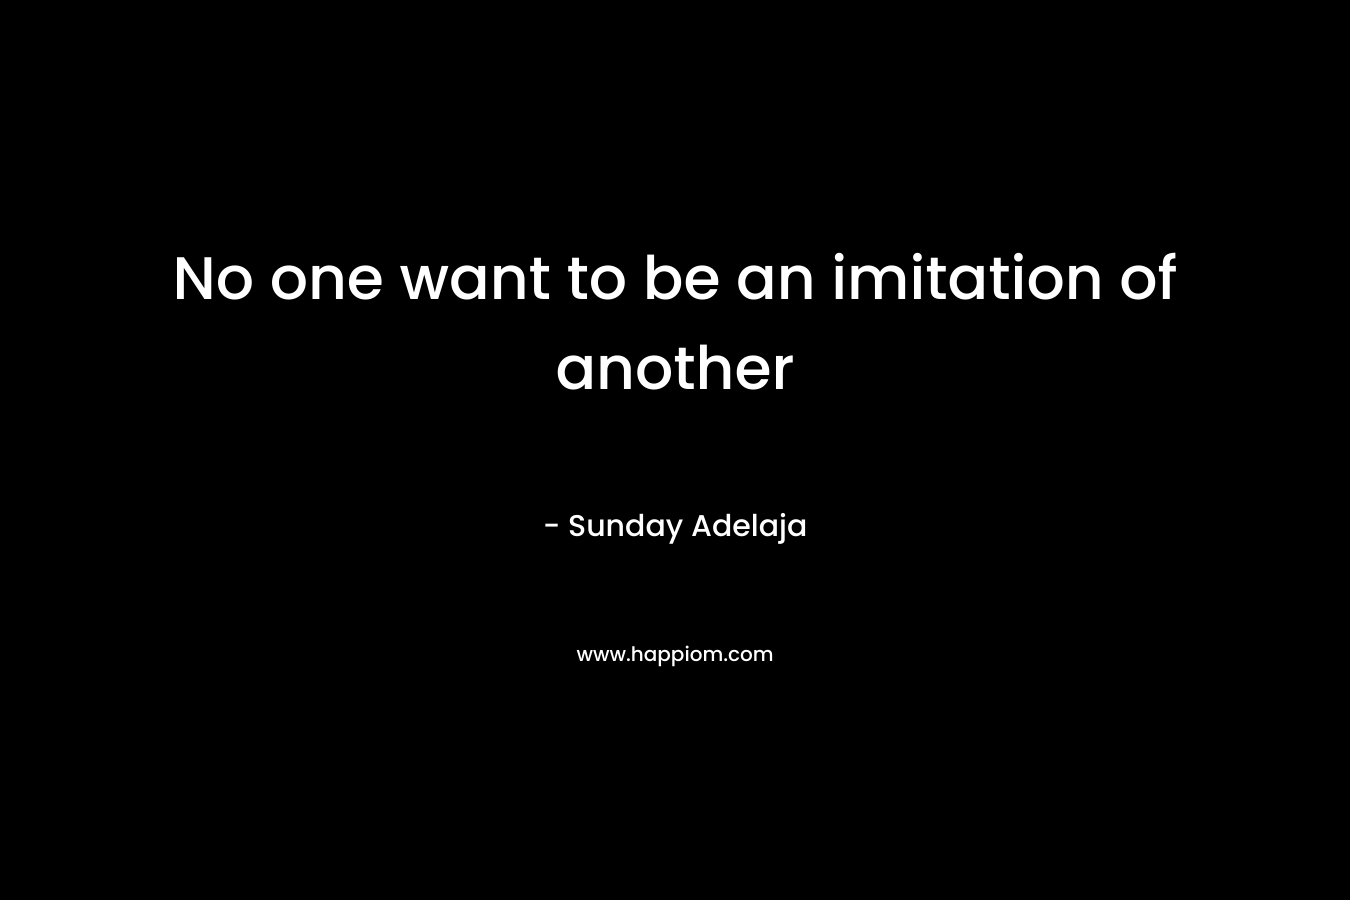 No one want to be an imitation of another